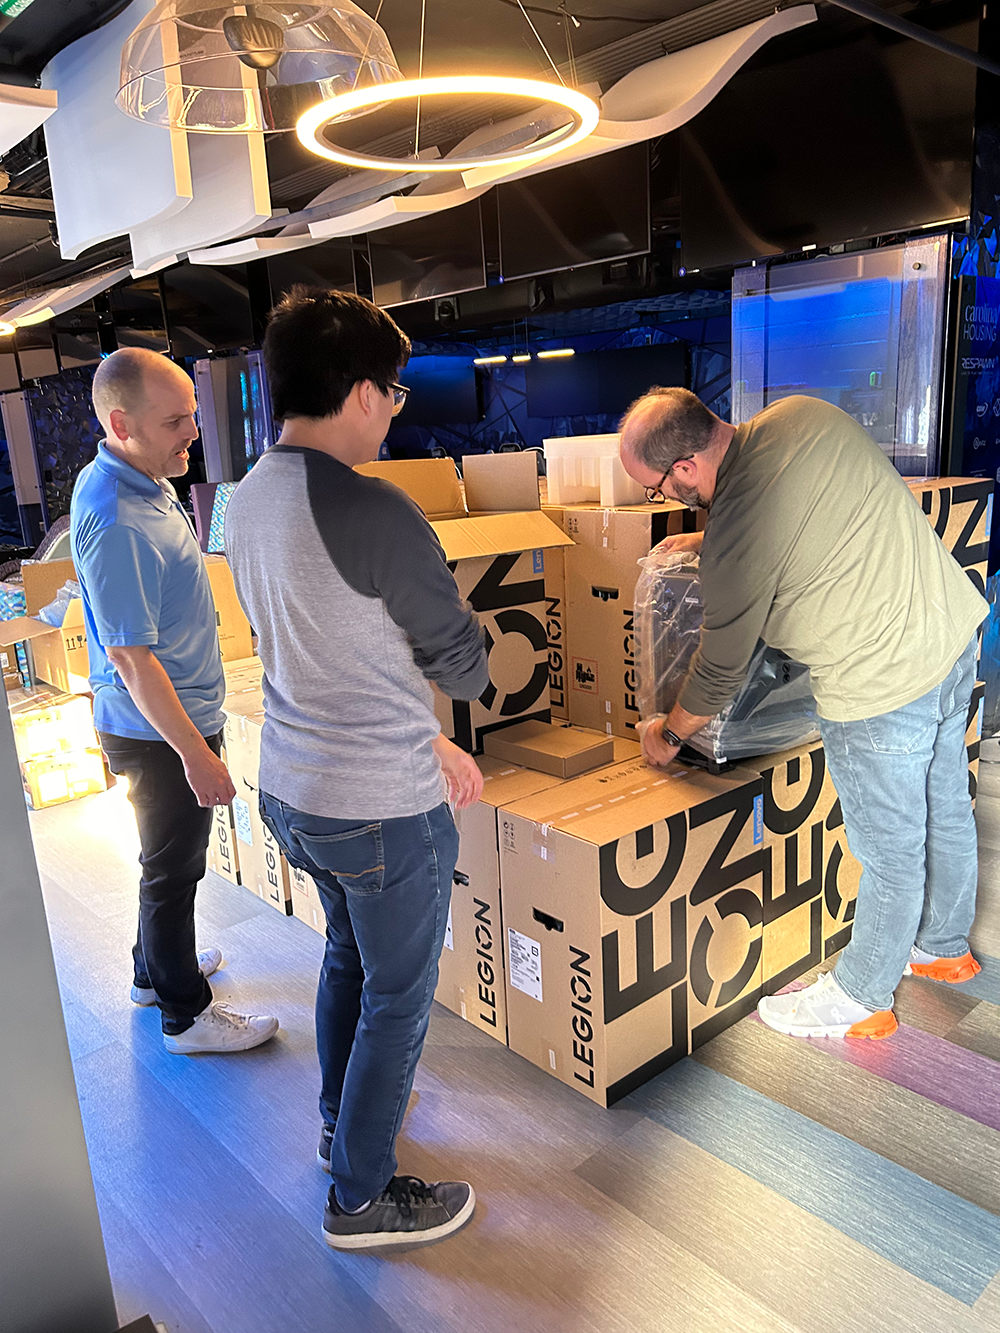 ResNET staffers unbox a gaming desktop from a stack of boxes